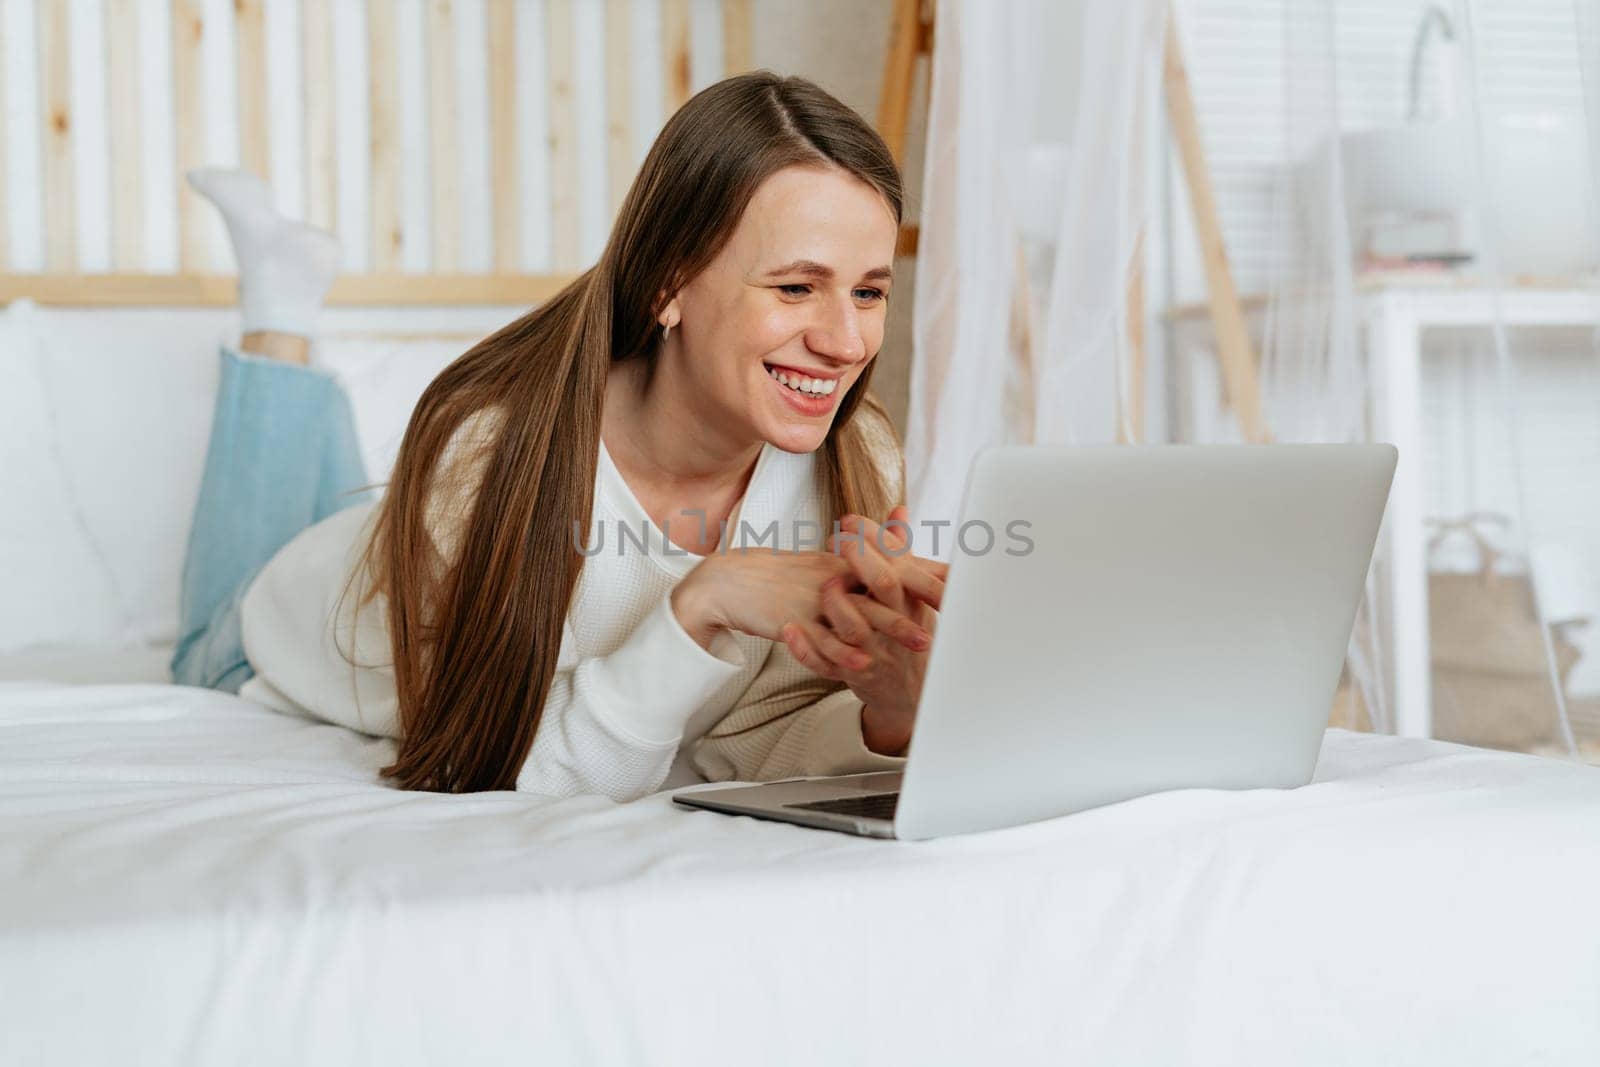 Freelance woman having a video call chat, typing in laptop and online shopping, lying on the white bed. Happy relaxed girl woking from home office. Distance learning online education and work.